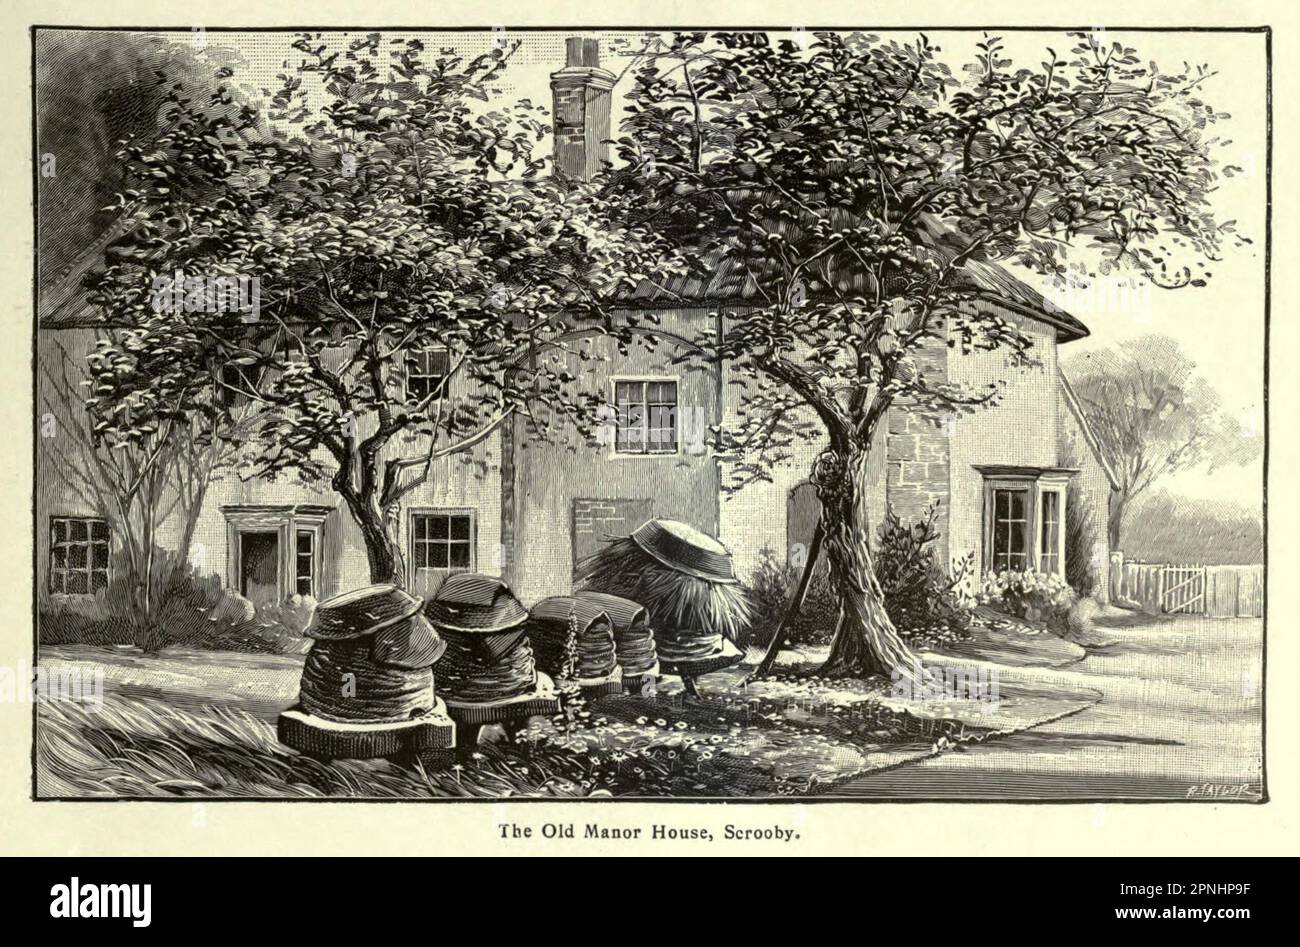 The Old Manor House, Scrooby William Brewster and the Church at Scrooby aus dem Buch " Homes and Haunts of the Pilgrim Vaters " von Alexander MacKennal, 1835-1904; überarbeitet von Howell Elvet Lewis, Publikationsdatum 1920 Publisher London, The Religious Trakt Society Stockfoto